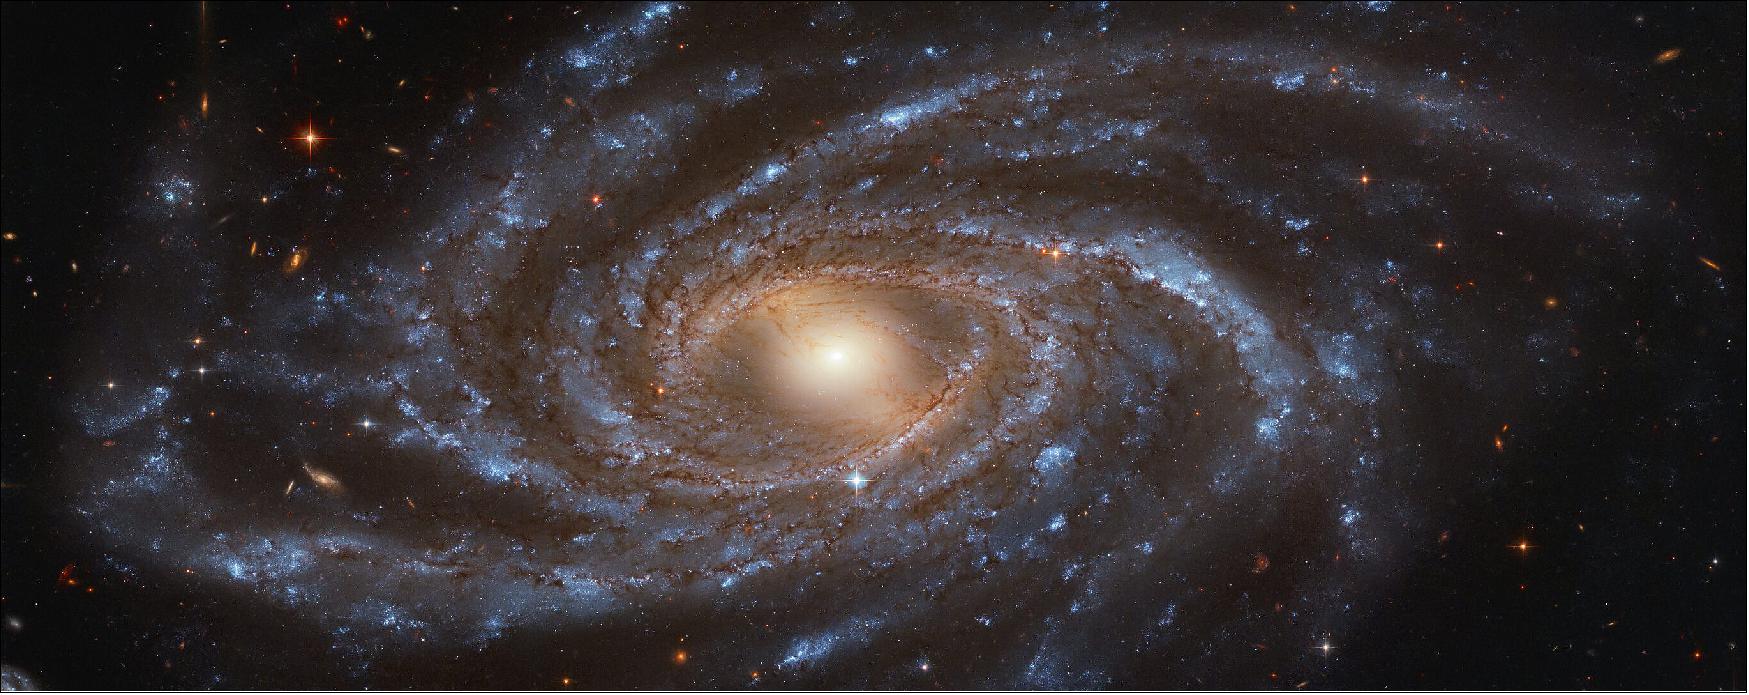 Figure 110: NGC 2336 is the quintessential galaxy — big, beautiful and blue — and it is captured here by the NASA/ESA Hubble Space Telescope. The barred spiral galaxy stretches an immense 200,000 light-years across and is located approximately 100 million light years away in the northern constellation of Camelopardalis (The Giraffe), image credit: ESA/Hubble & NASA, V. Antoniou; CC BY 4.0 – Acknowledgement: Judy Schmidt